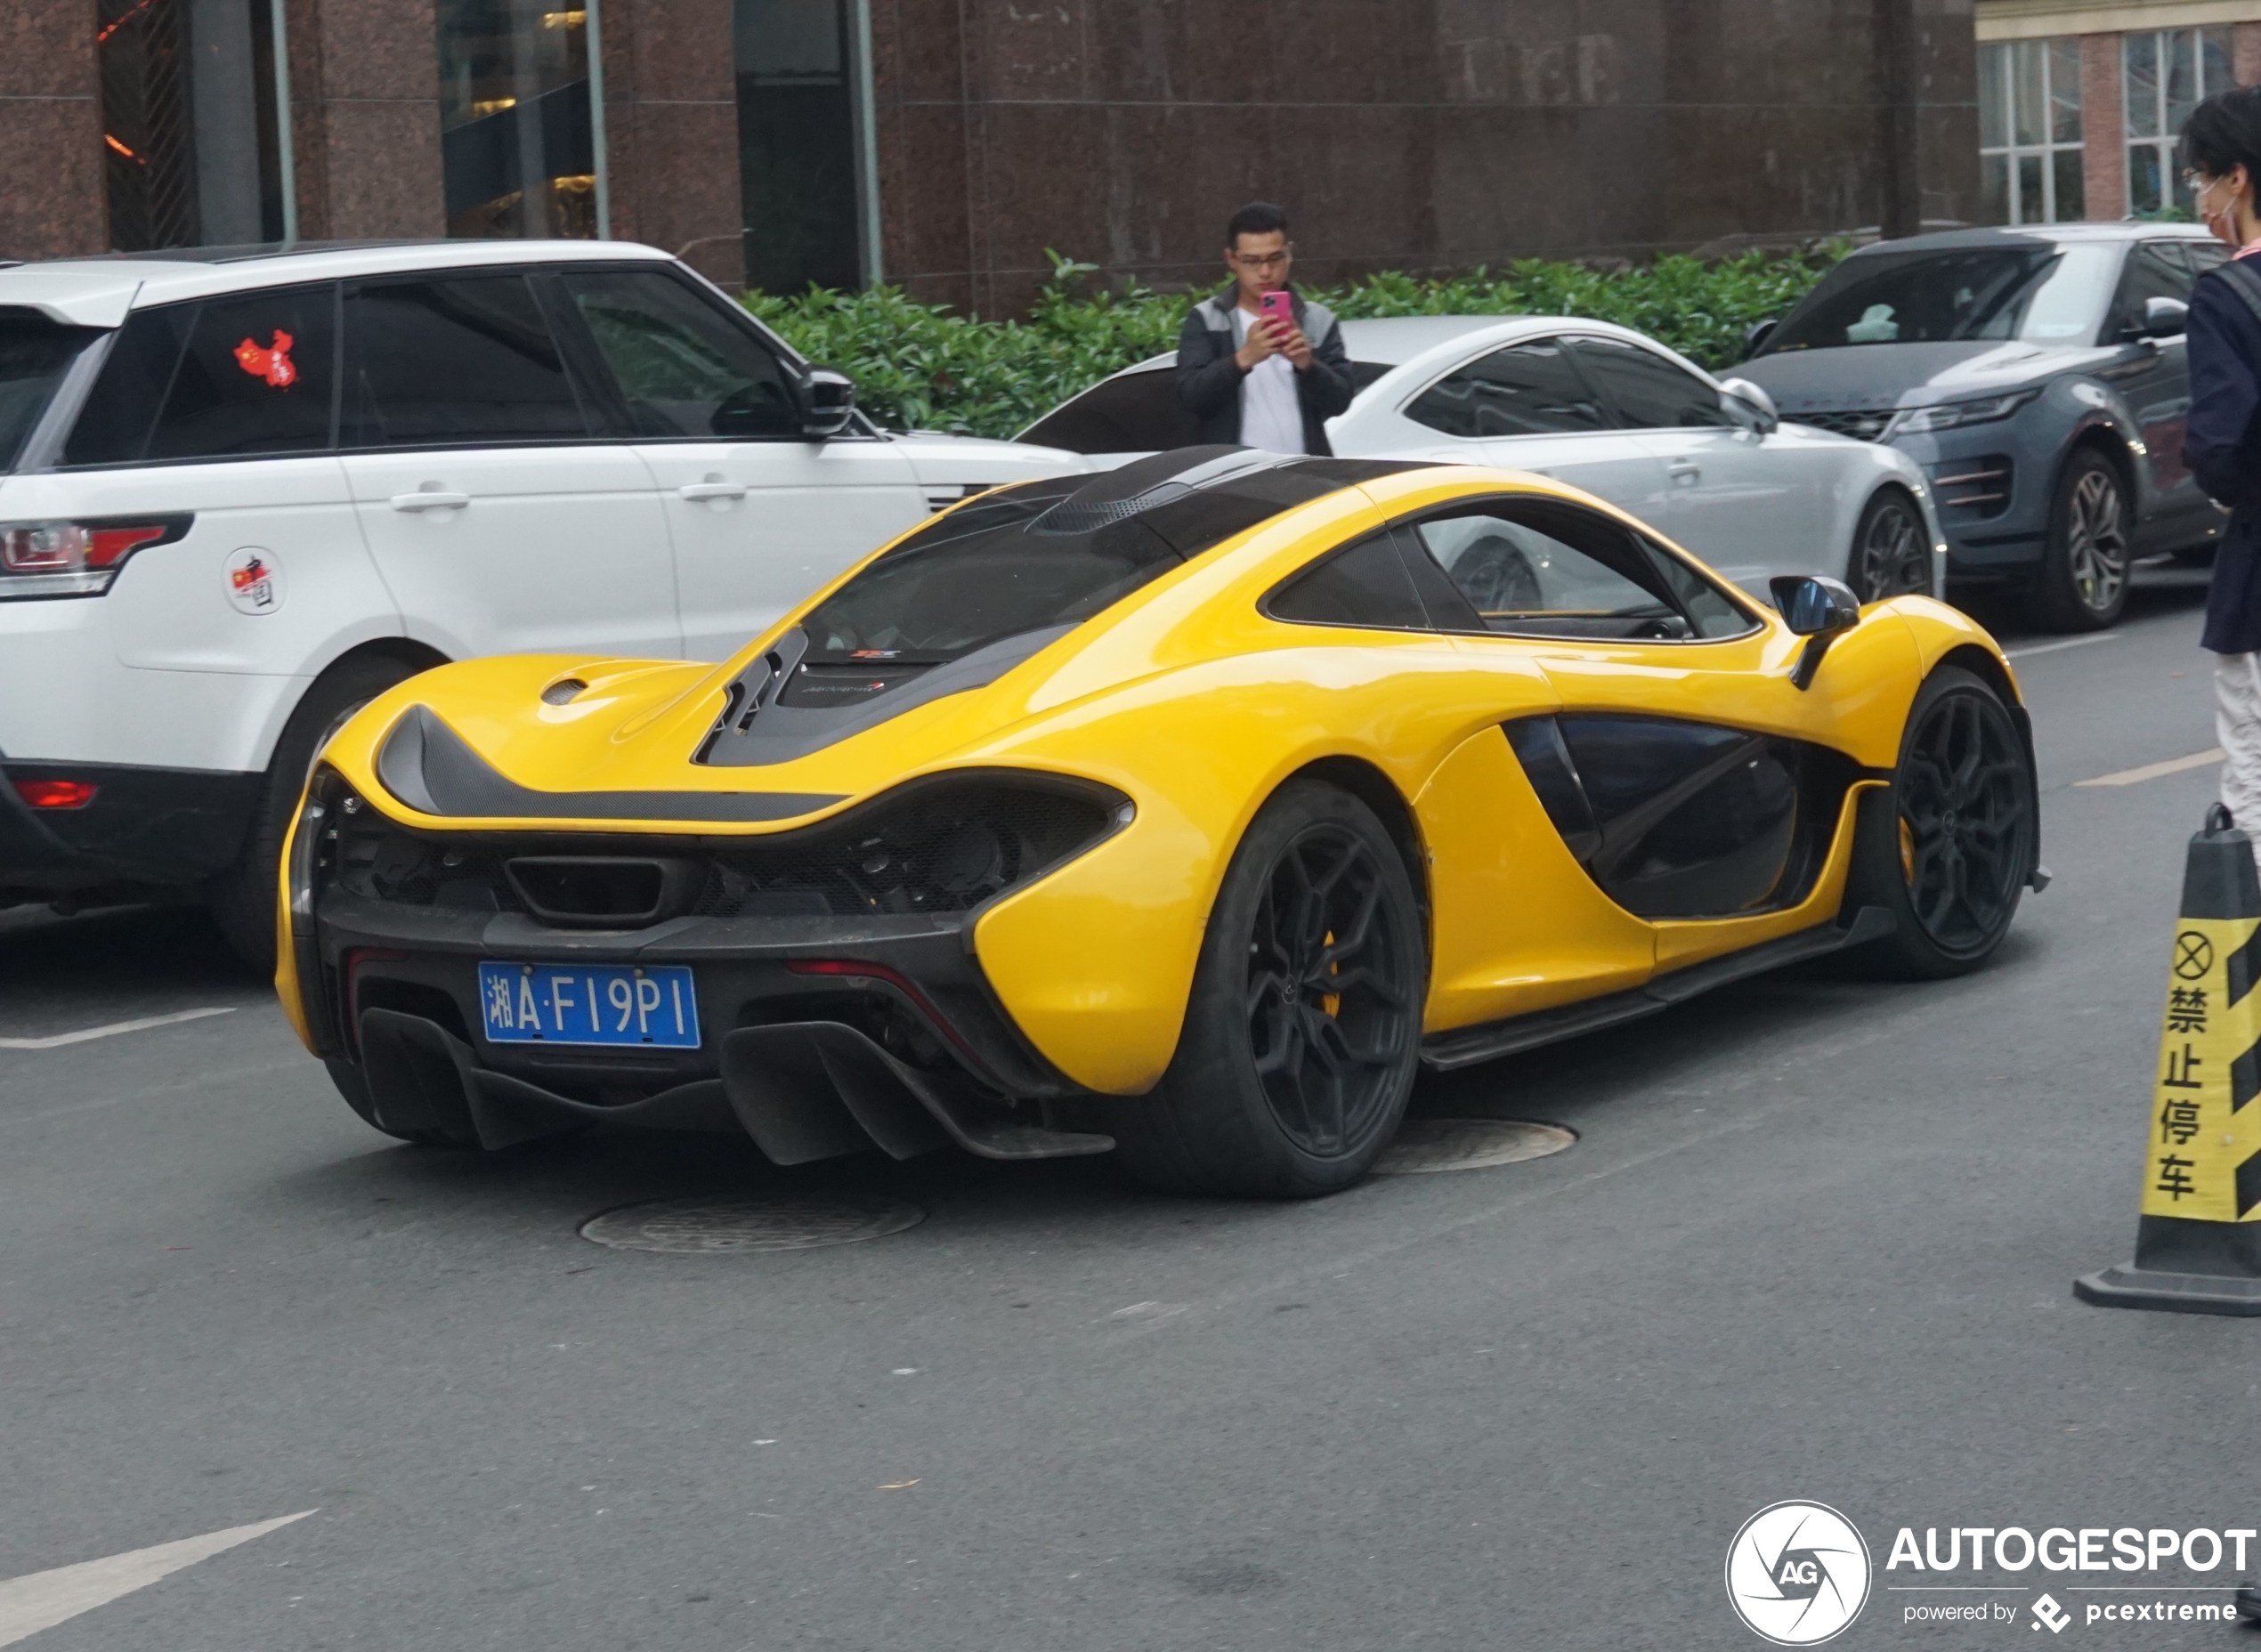 Black and Yellow P1 is bizar